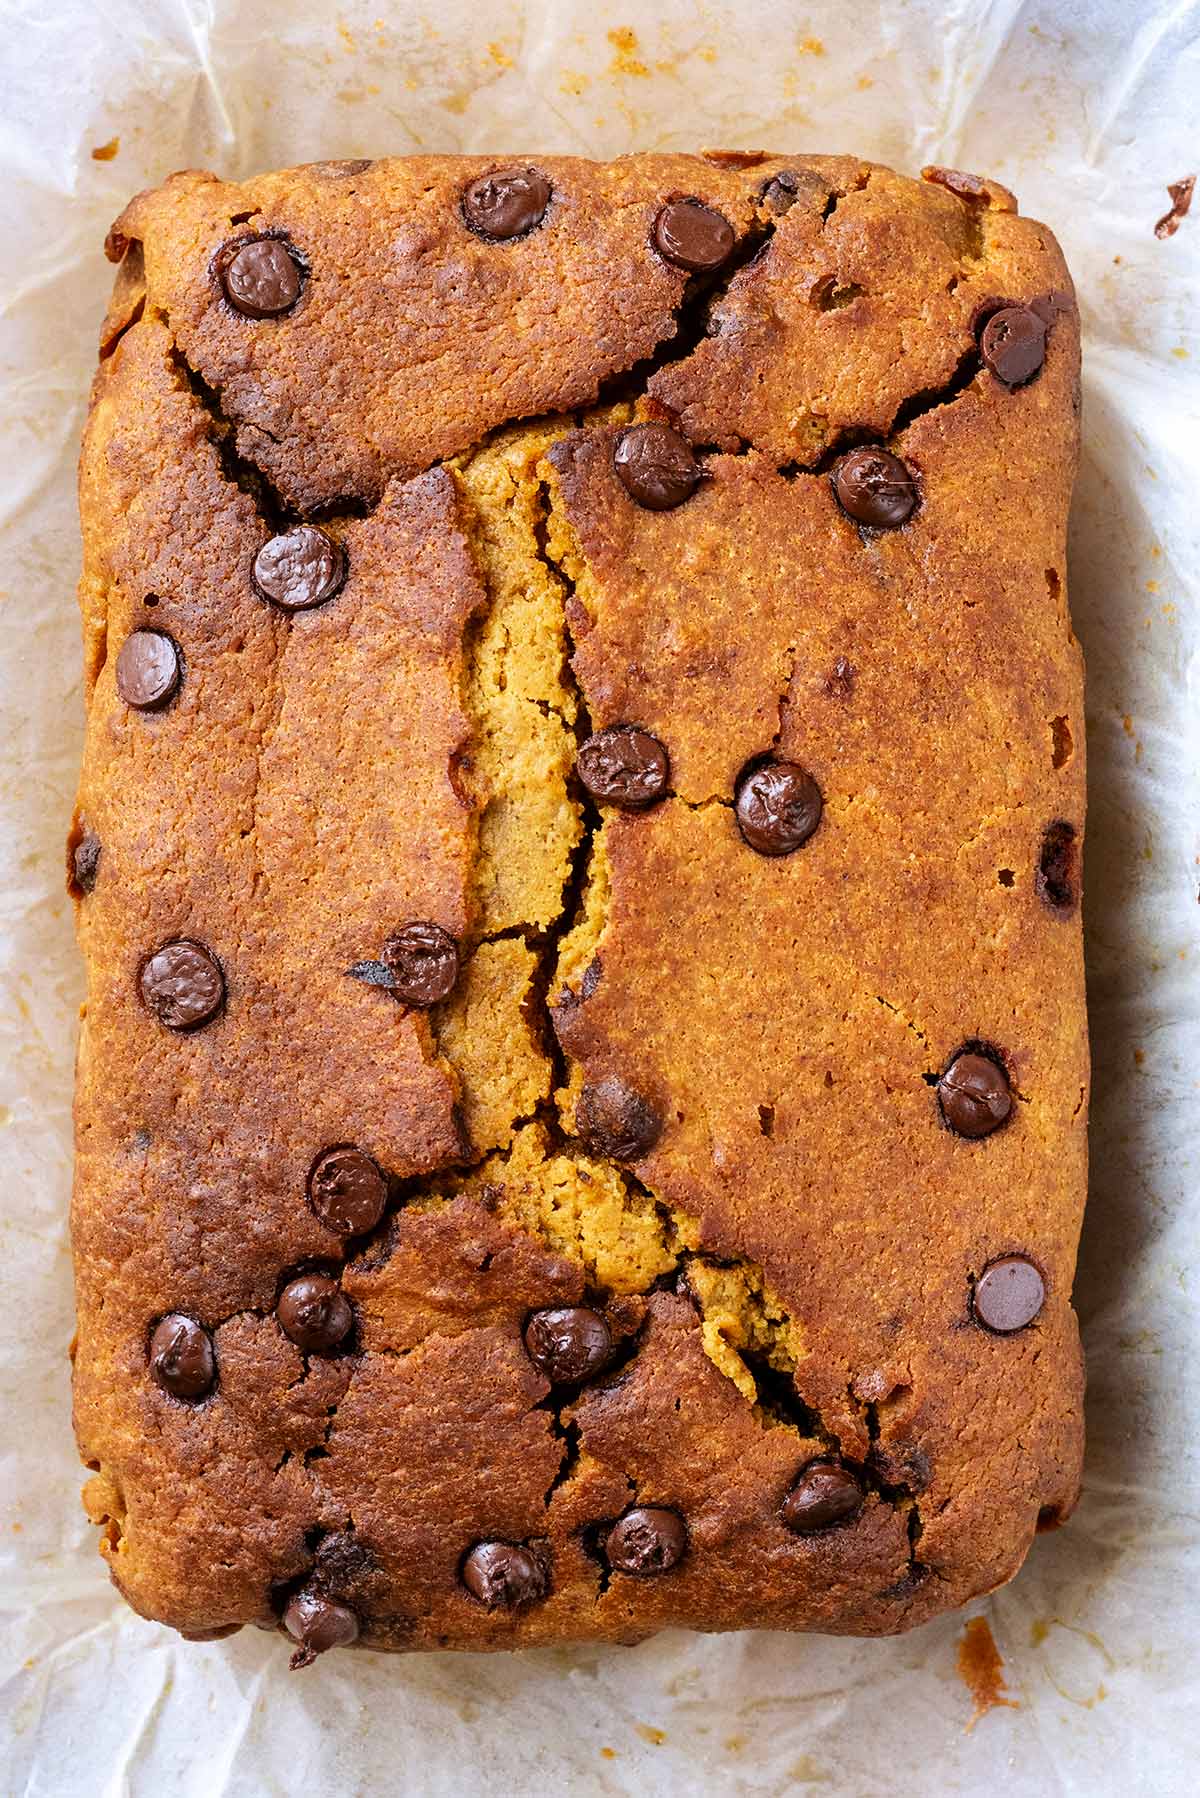 A whole cooked pumpkin loaf cake topped with chocolate chips.